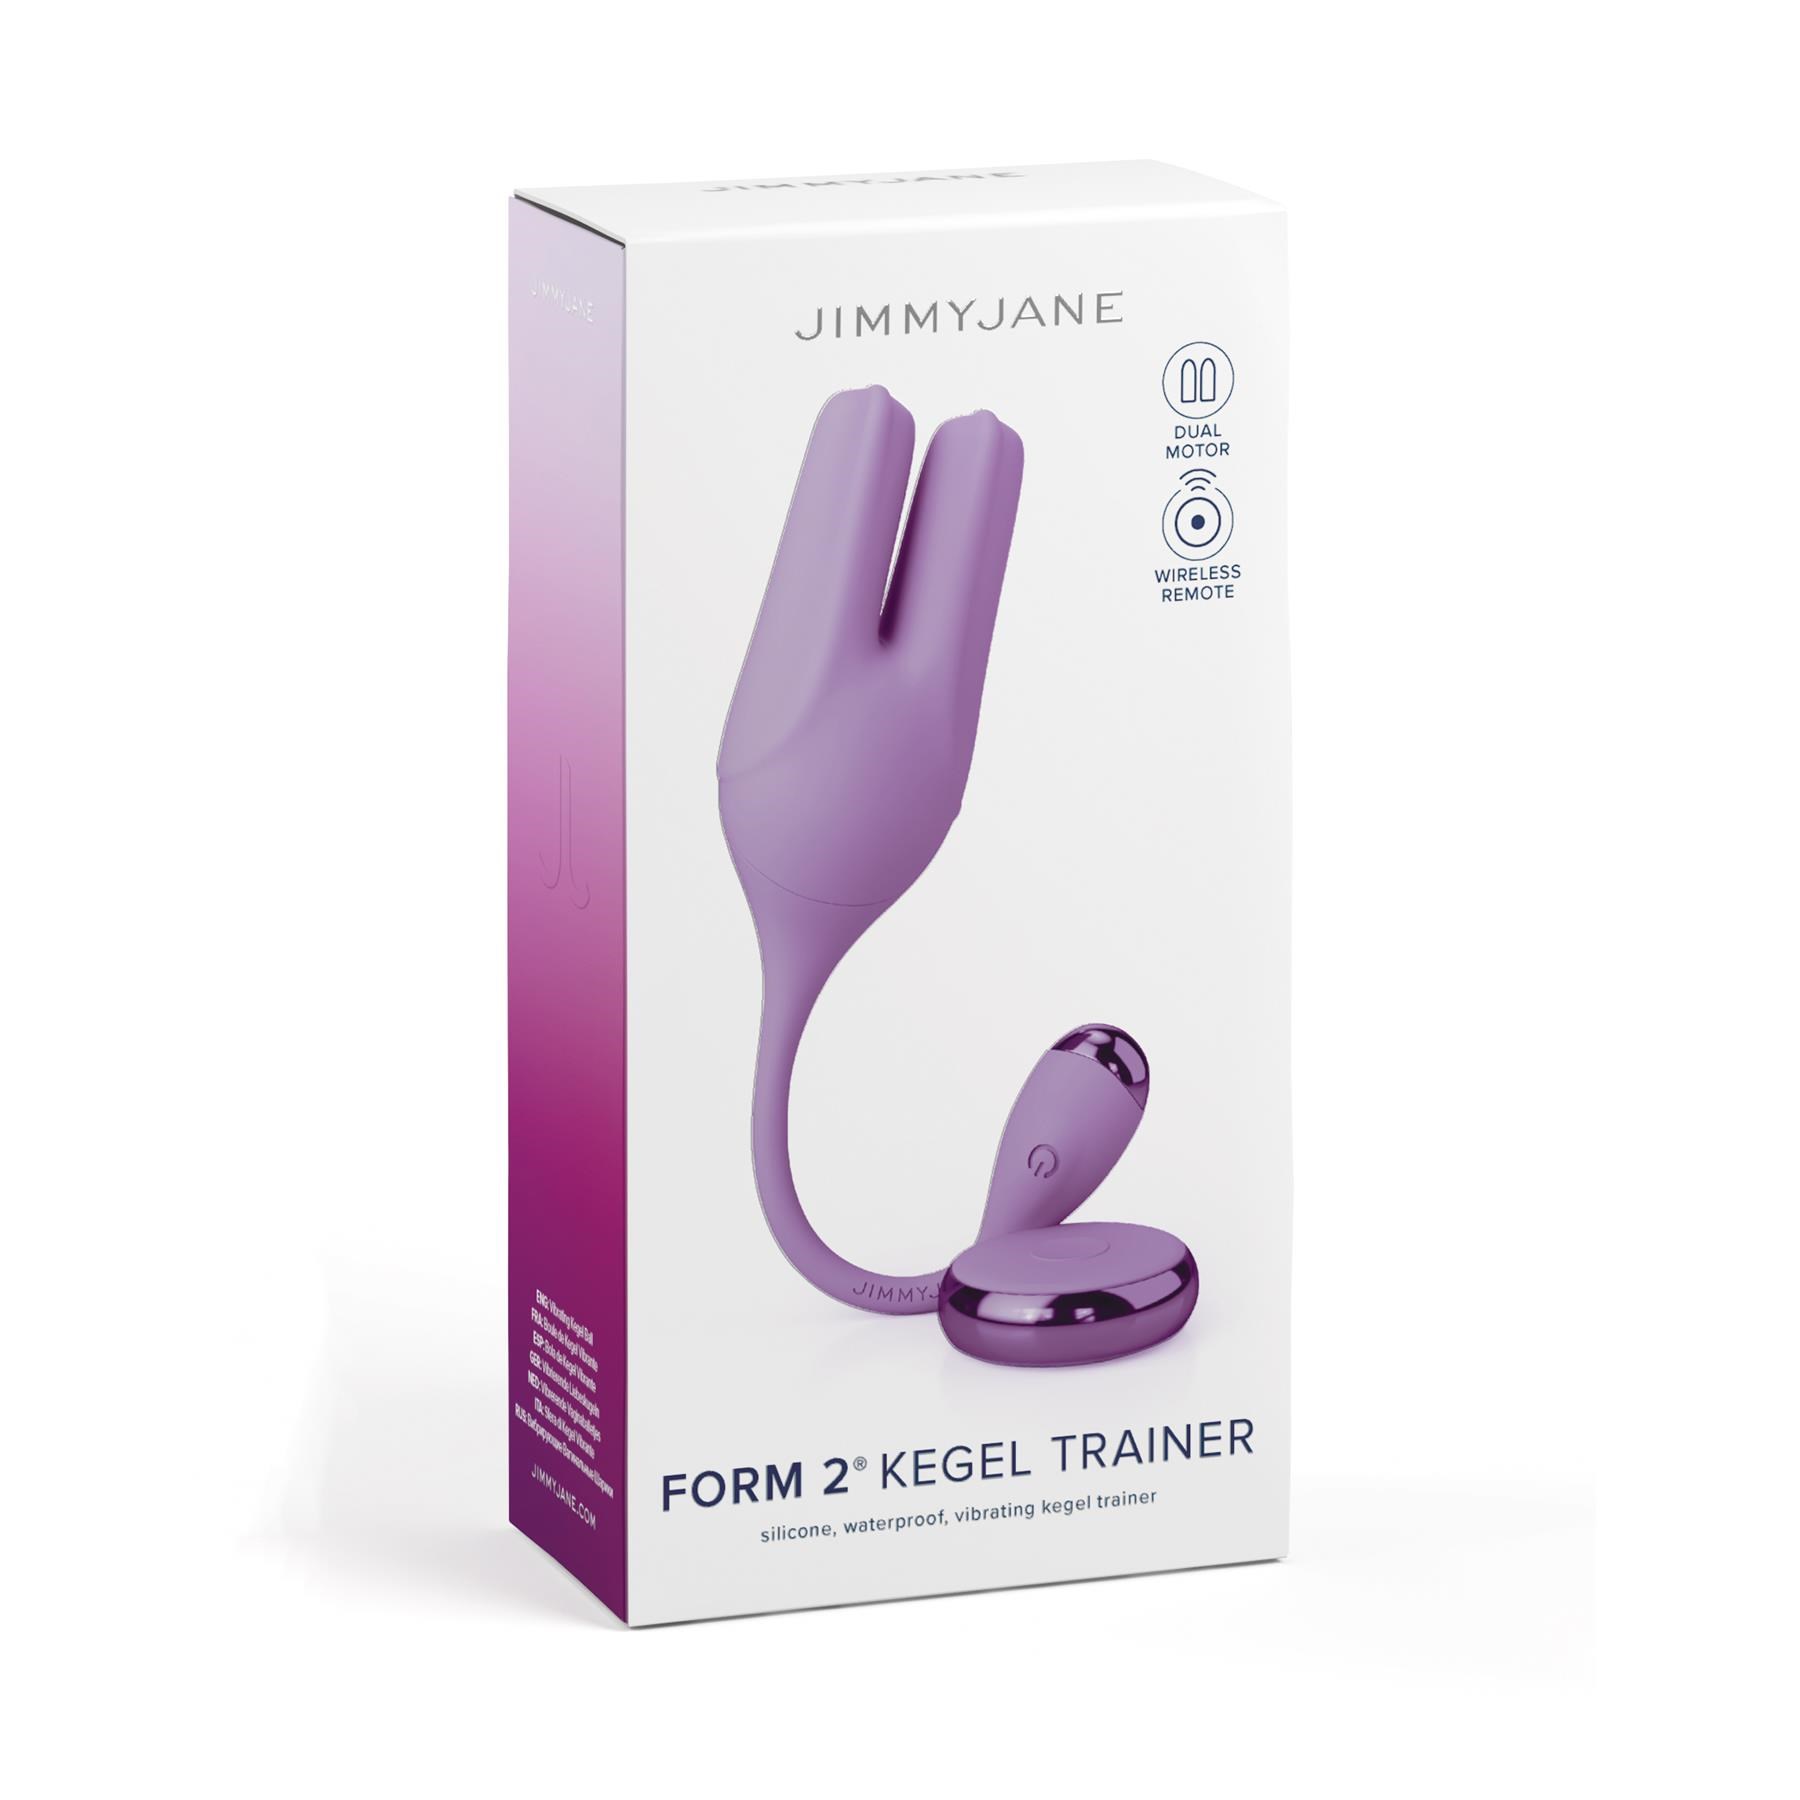 Jimmy Jane Form 2 Kegel Trainer With Remote Control - Packaging